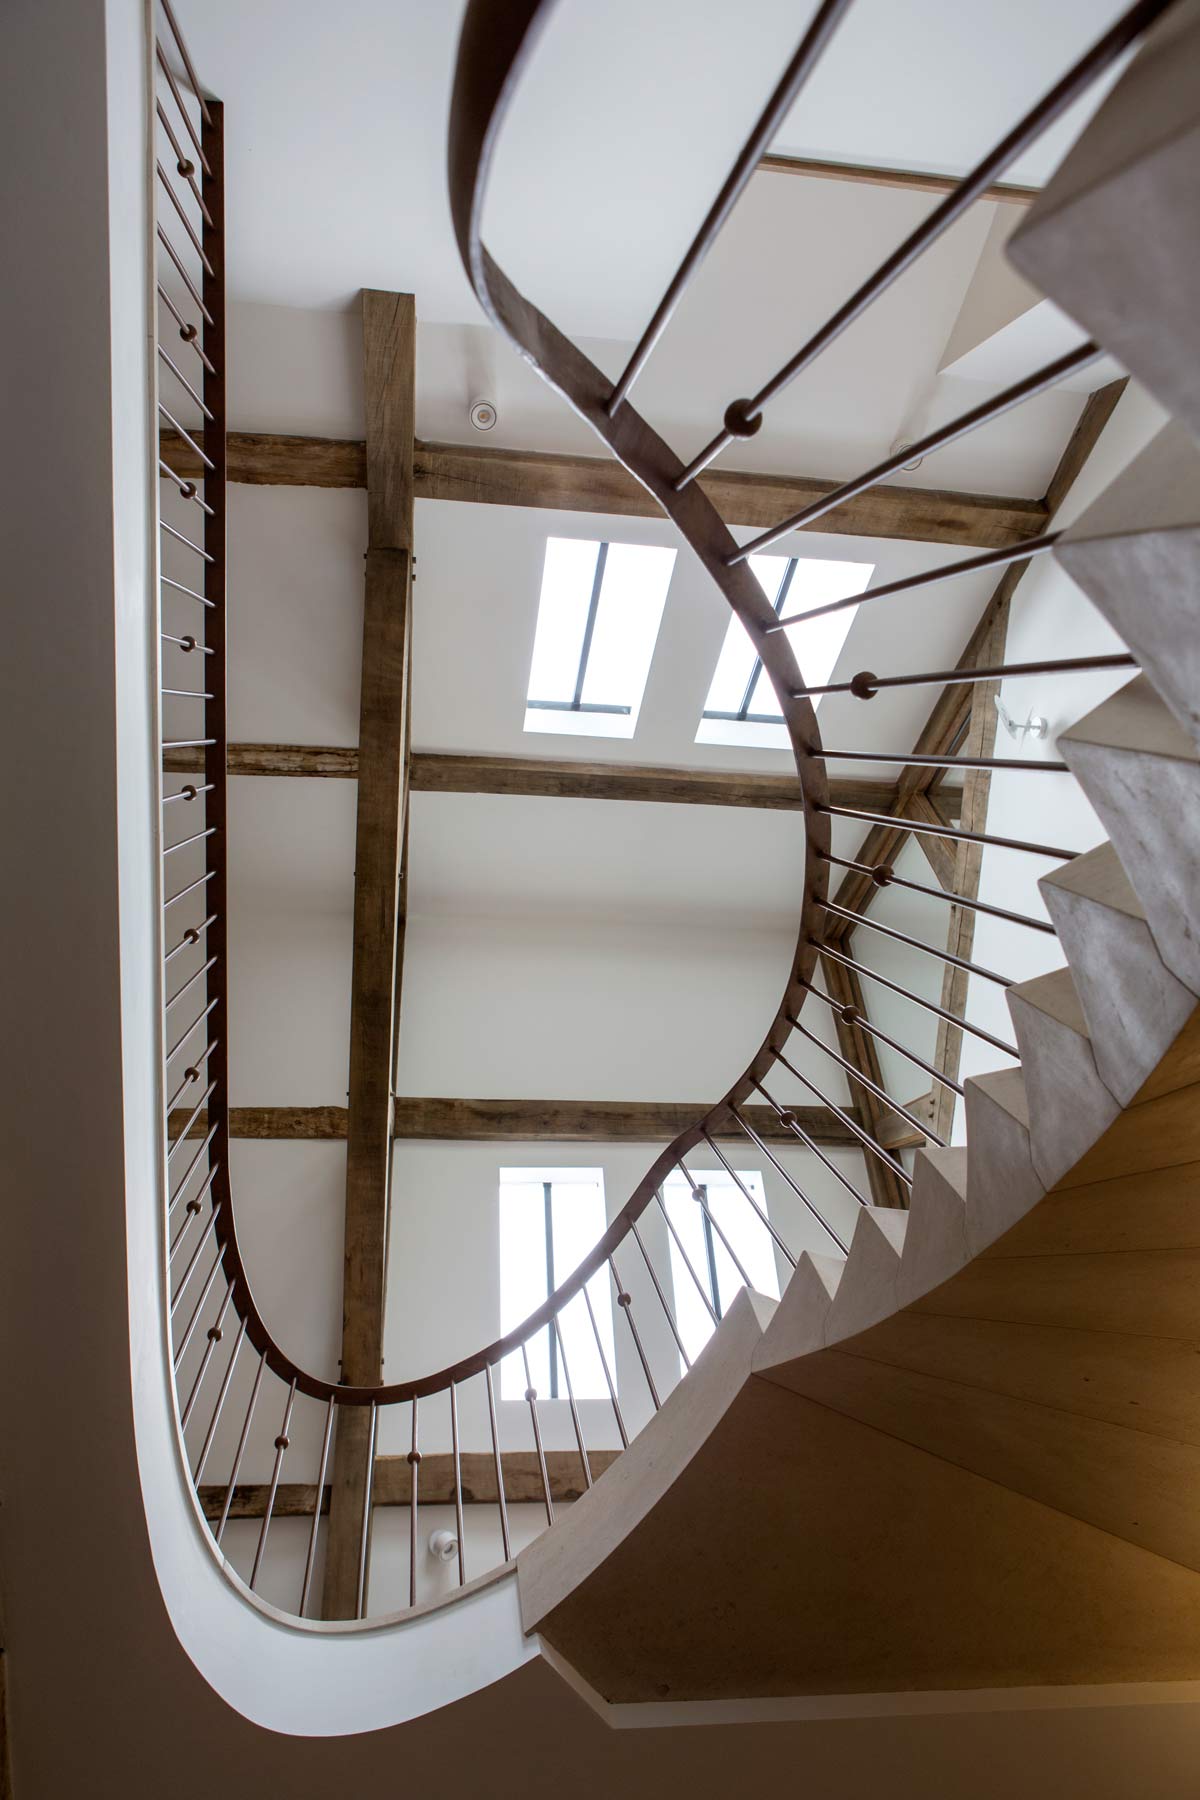 sculptural-curved-limestone-staircase-3-iron-spindles-ballustrade-oxfordshire-rogue-designs-ian-knapper.jpg